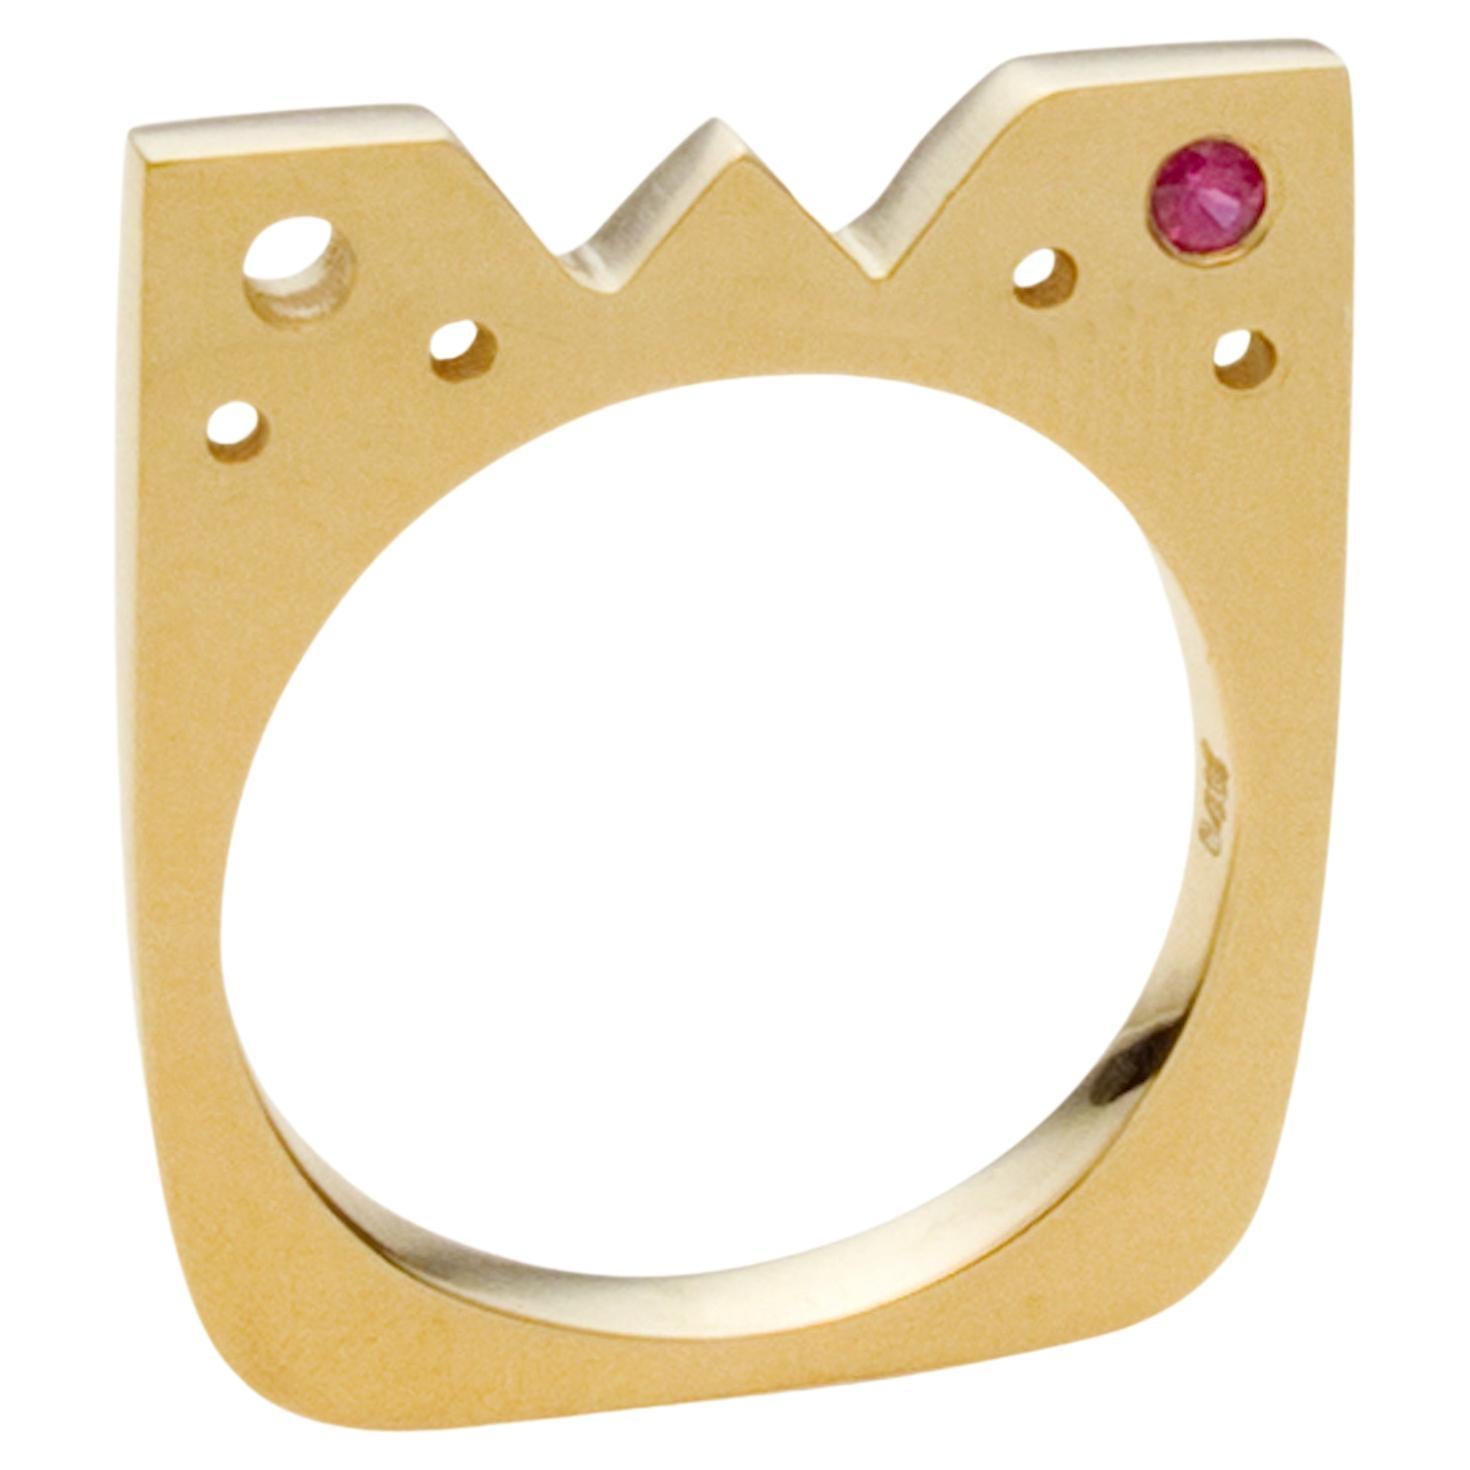 Susan Crow Studio Square Flat Ring in Yellow Gold with Dark Pink Sapphire For Sale